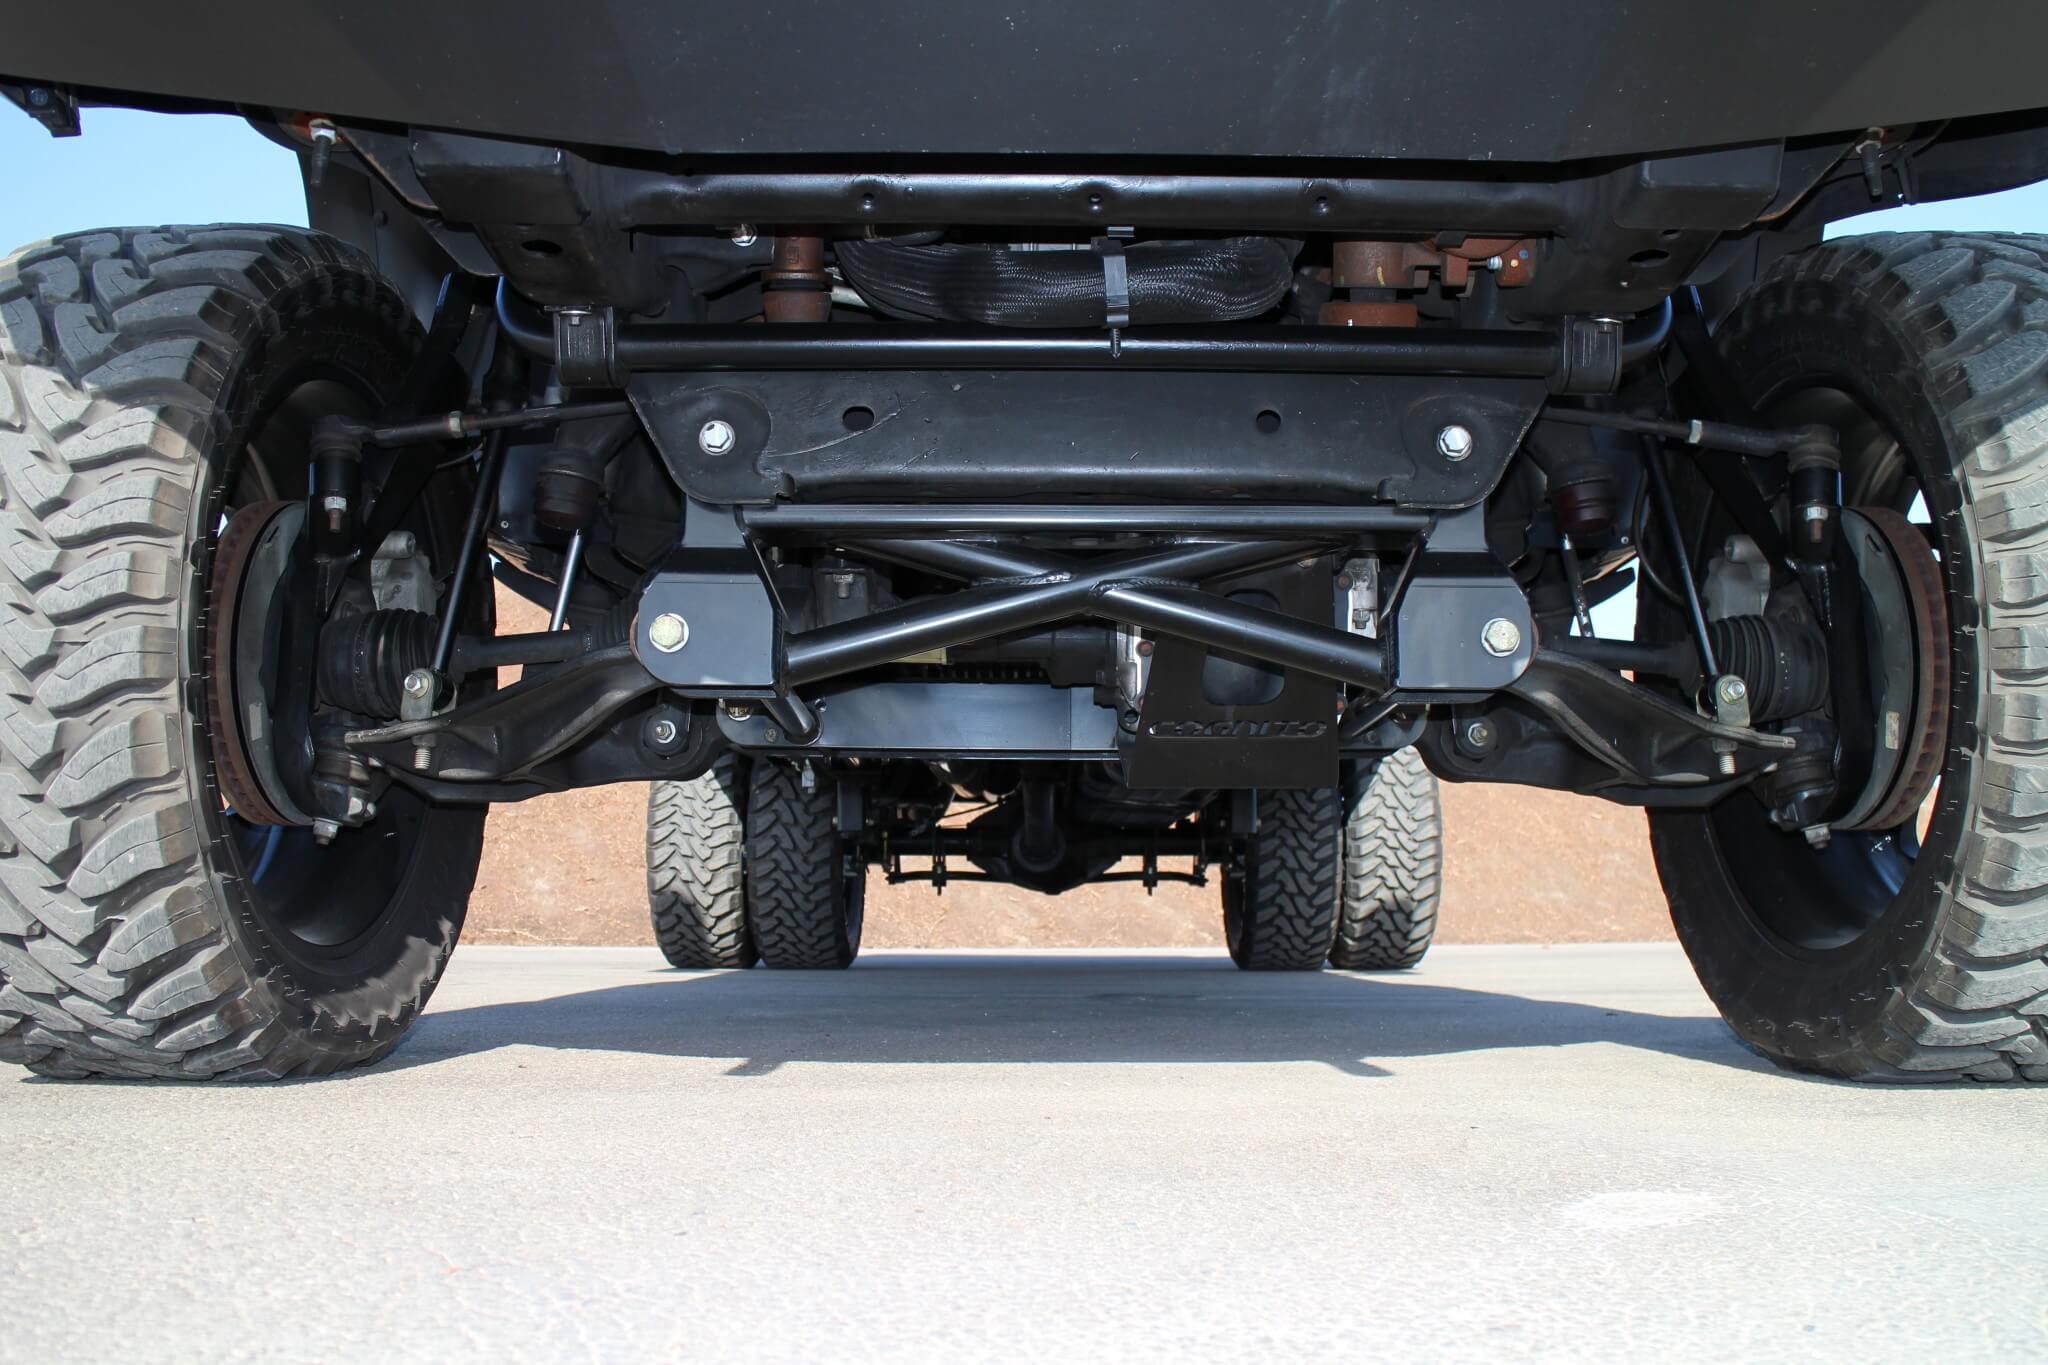 Underneath, an Cognito 7-inch lift kit was installed to elevate the Silverado to its new heights. The kit includes a front suspension drop cradle that lowers the suspension pickup points, as well as upper control arms, differential relocating mounting bracket, a beefier sway bar and longer end links. 